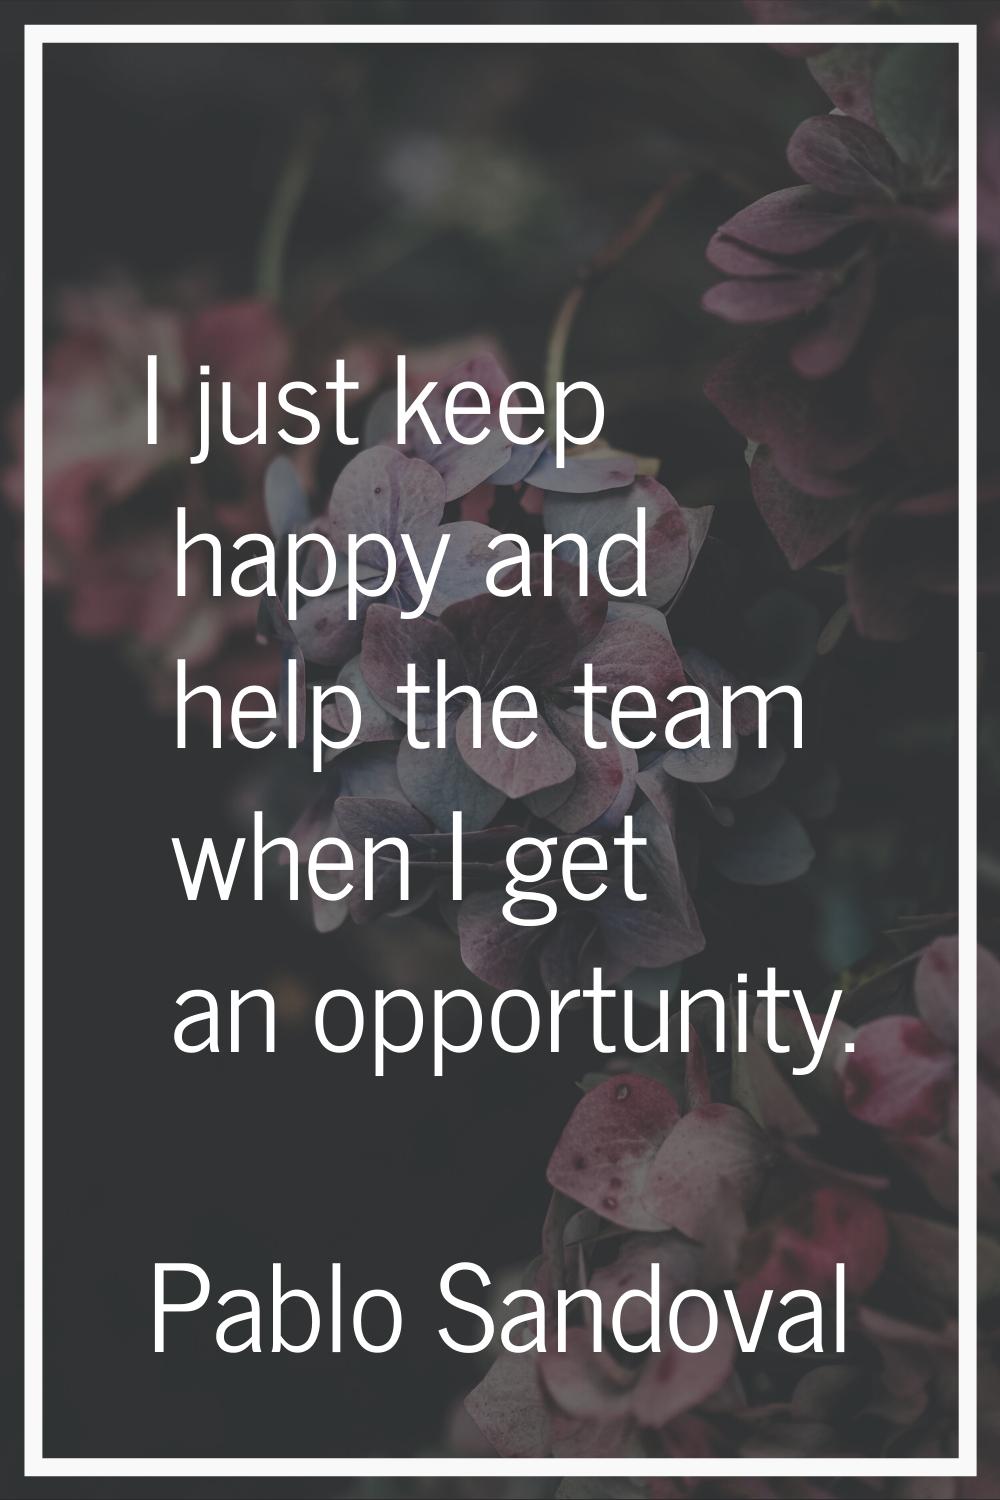 I just keep happy and help the team when I get an opportunity.